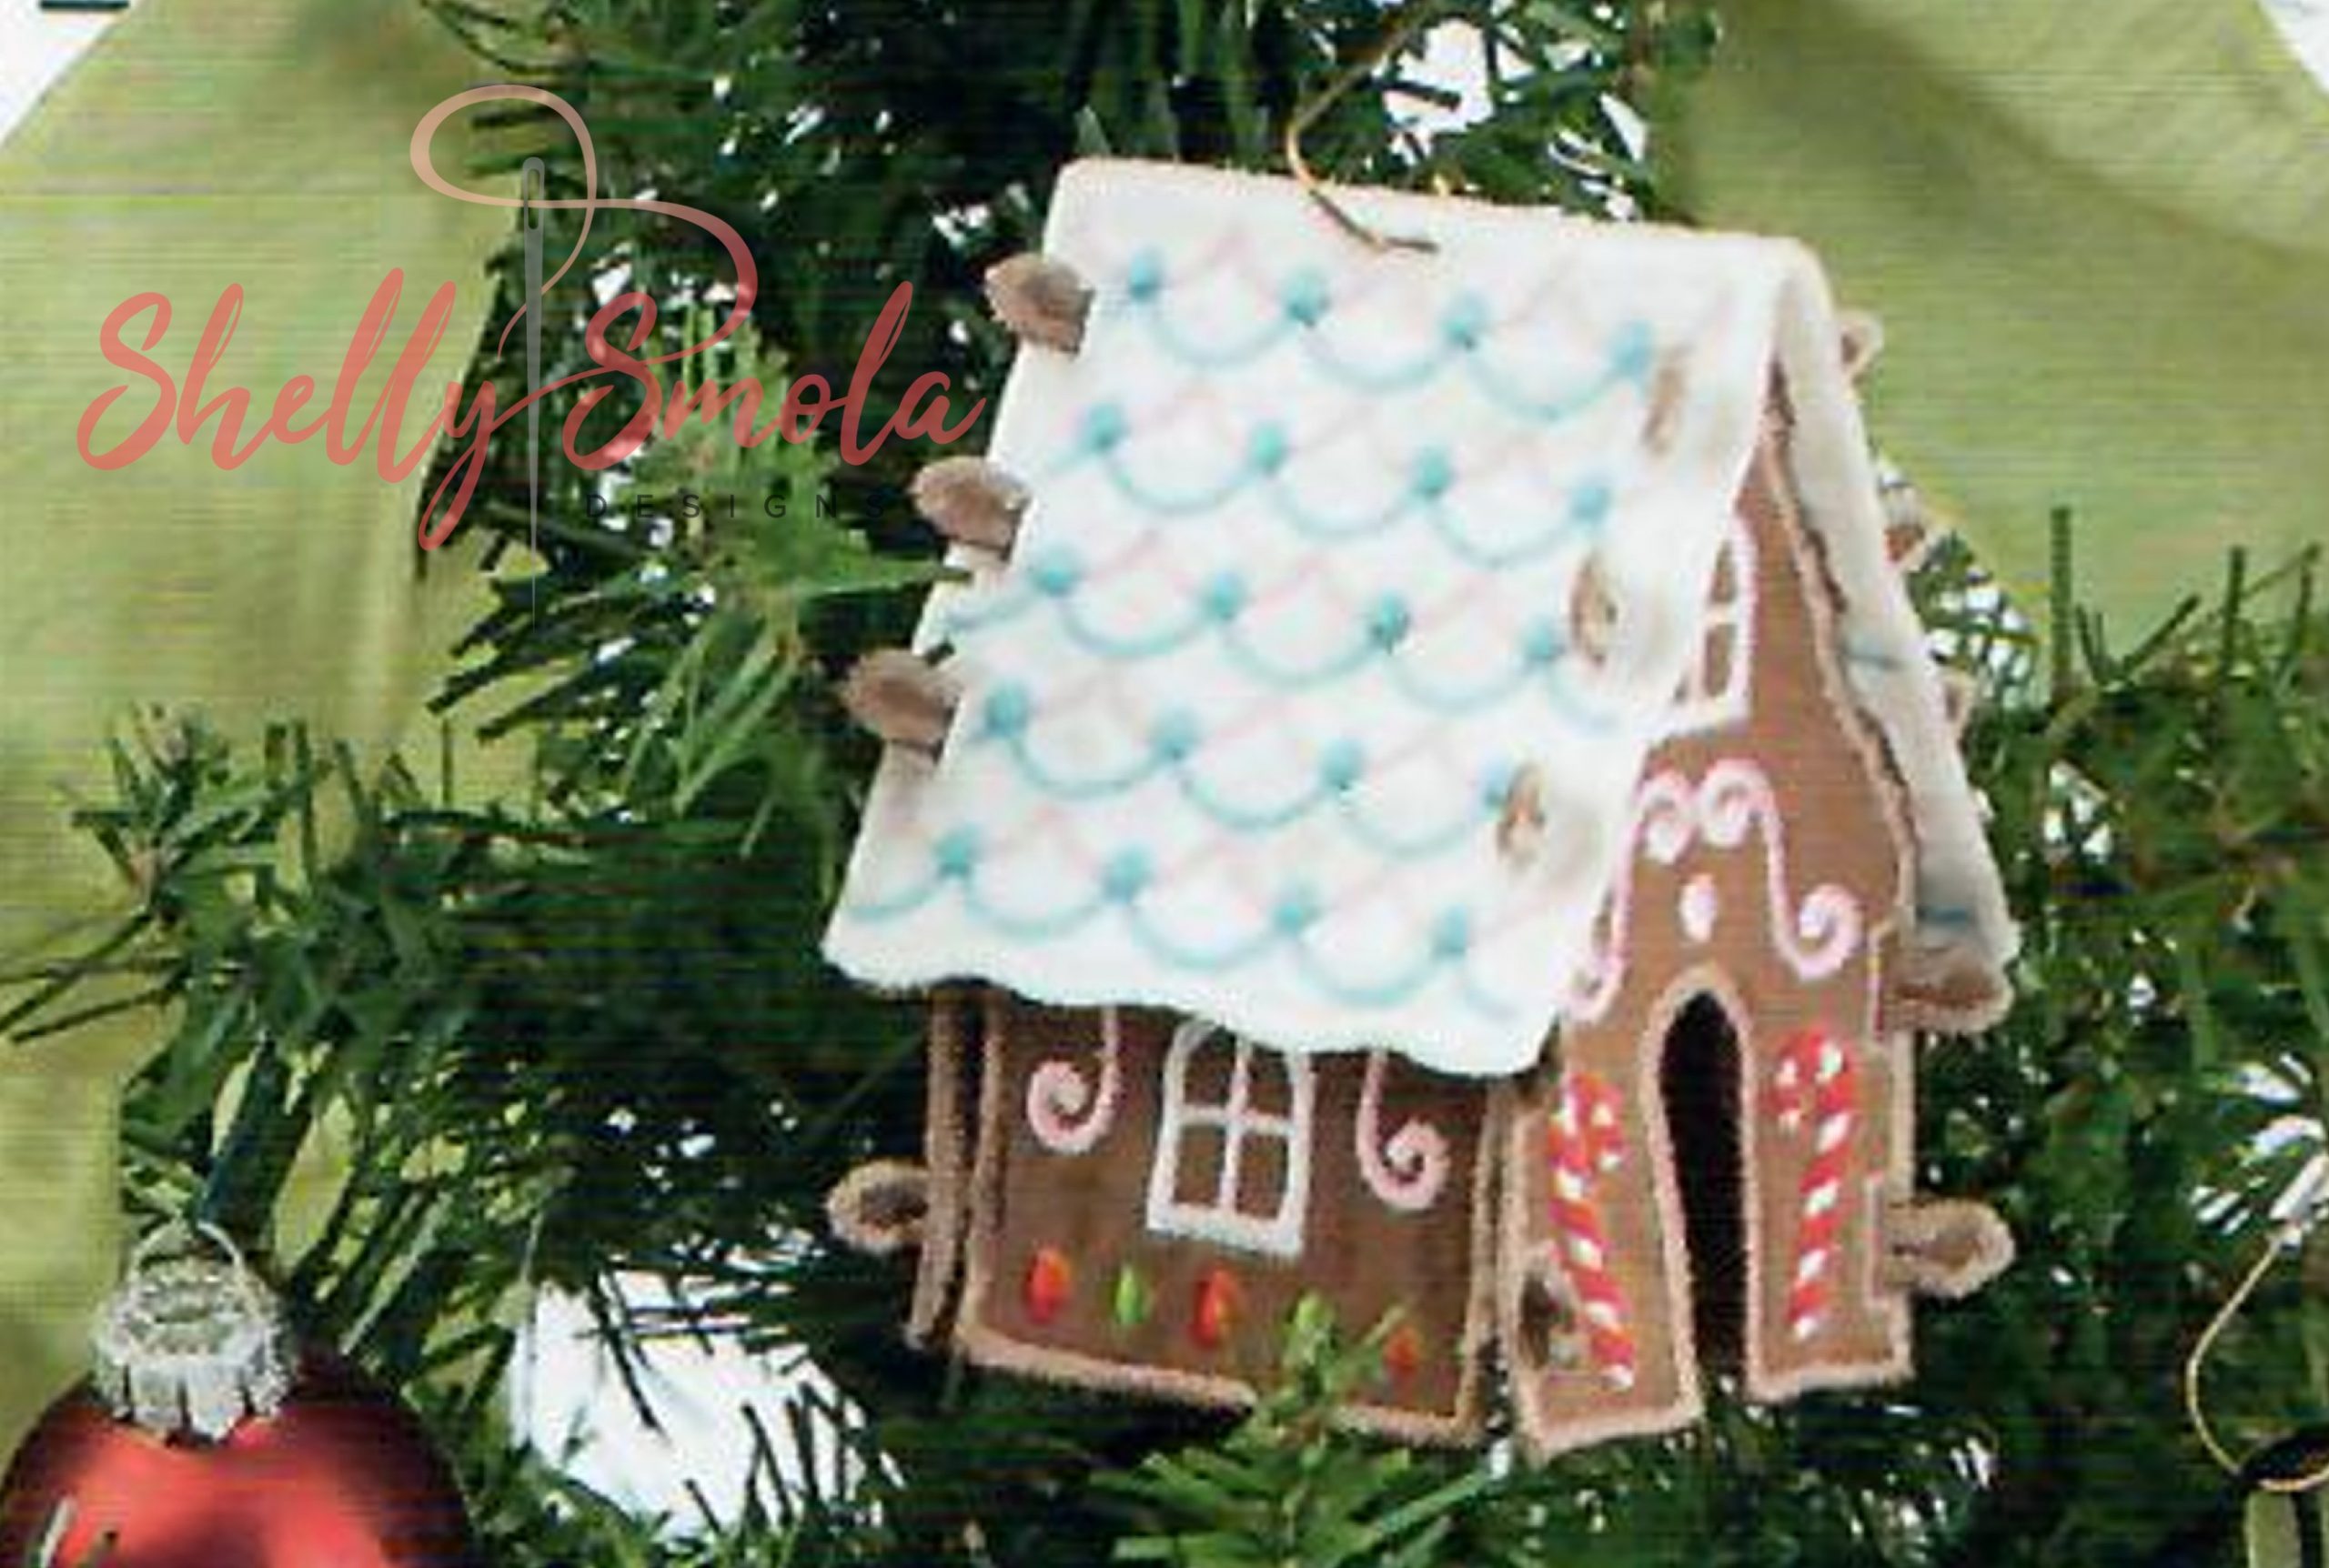 Merry Mini Cottage by Shelly Smola